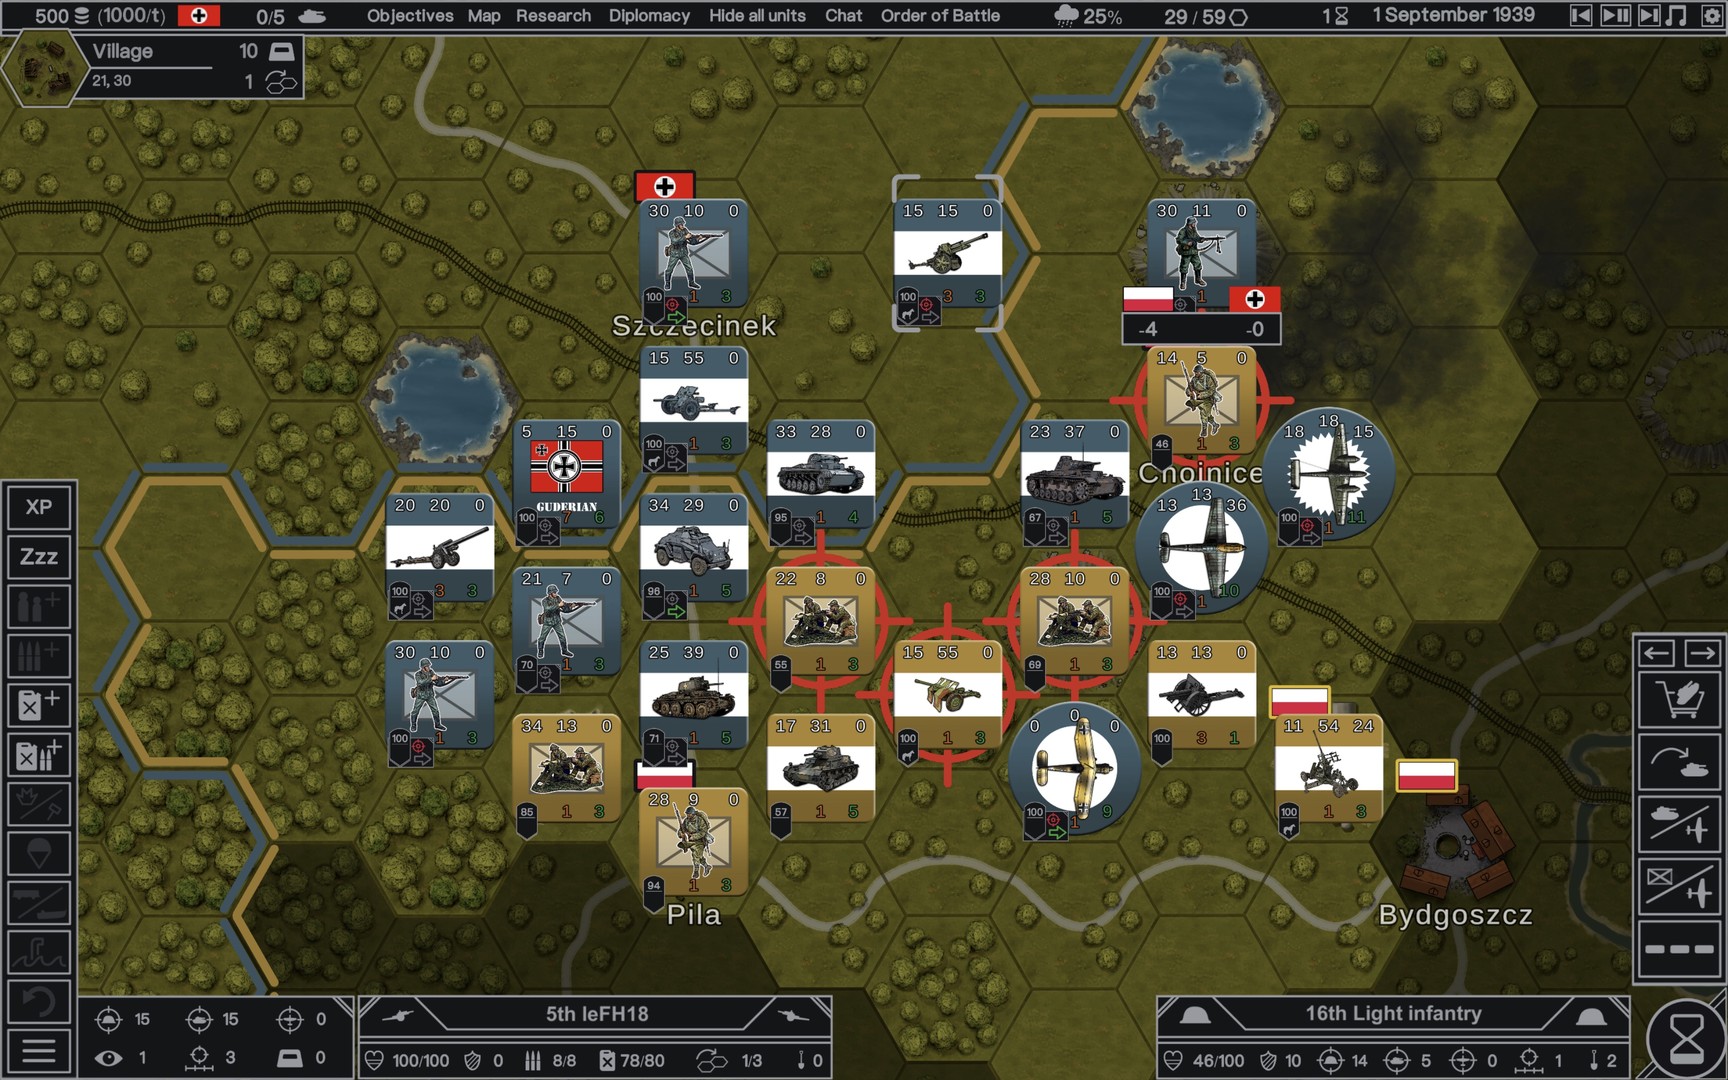 ww2 strategy games like panzers or company of heros